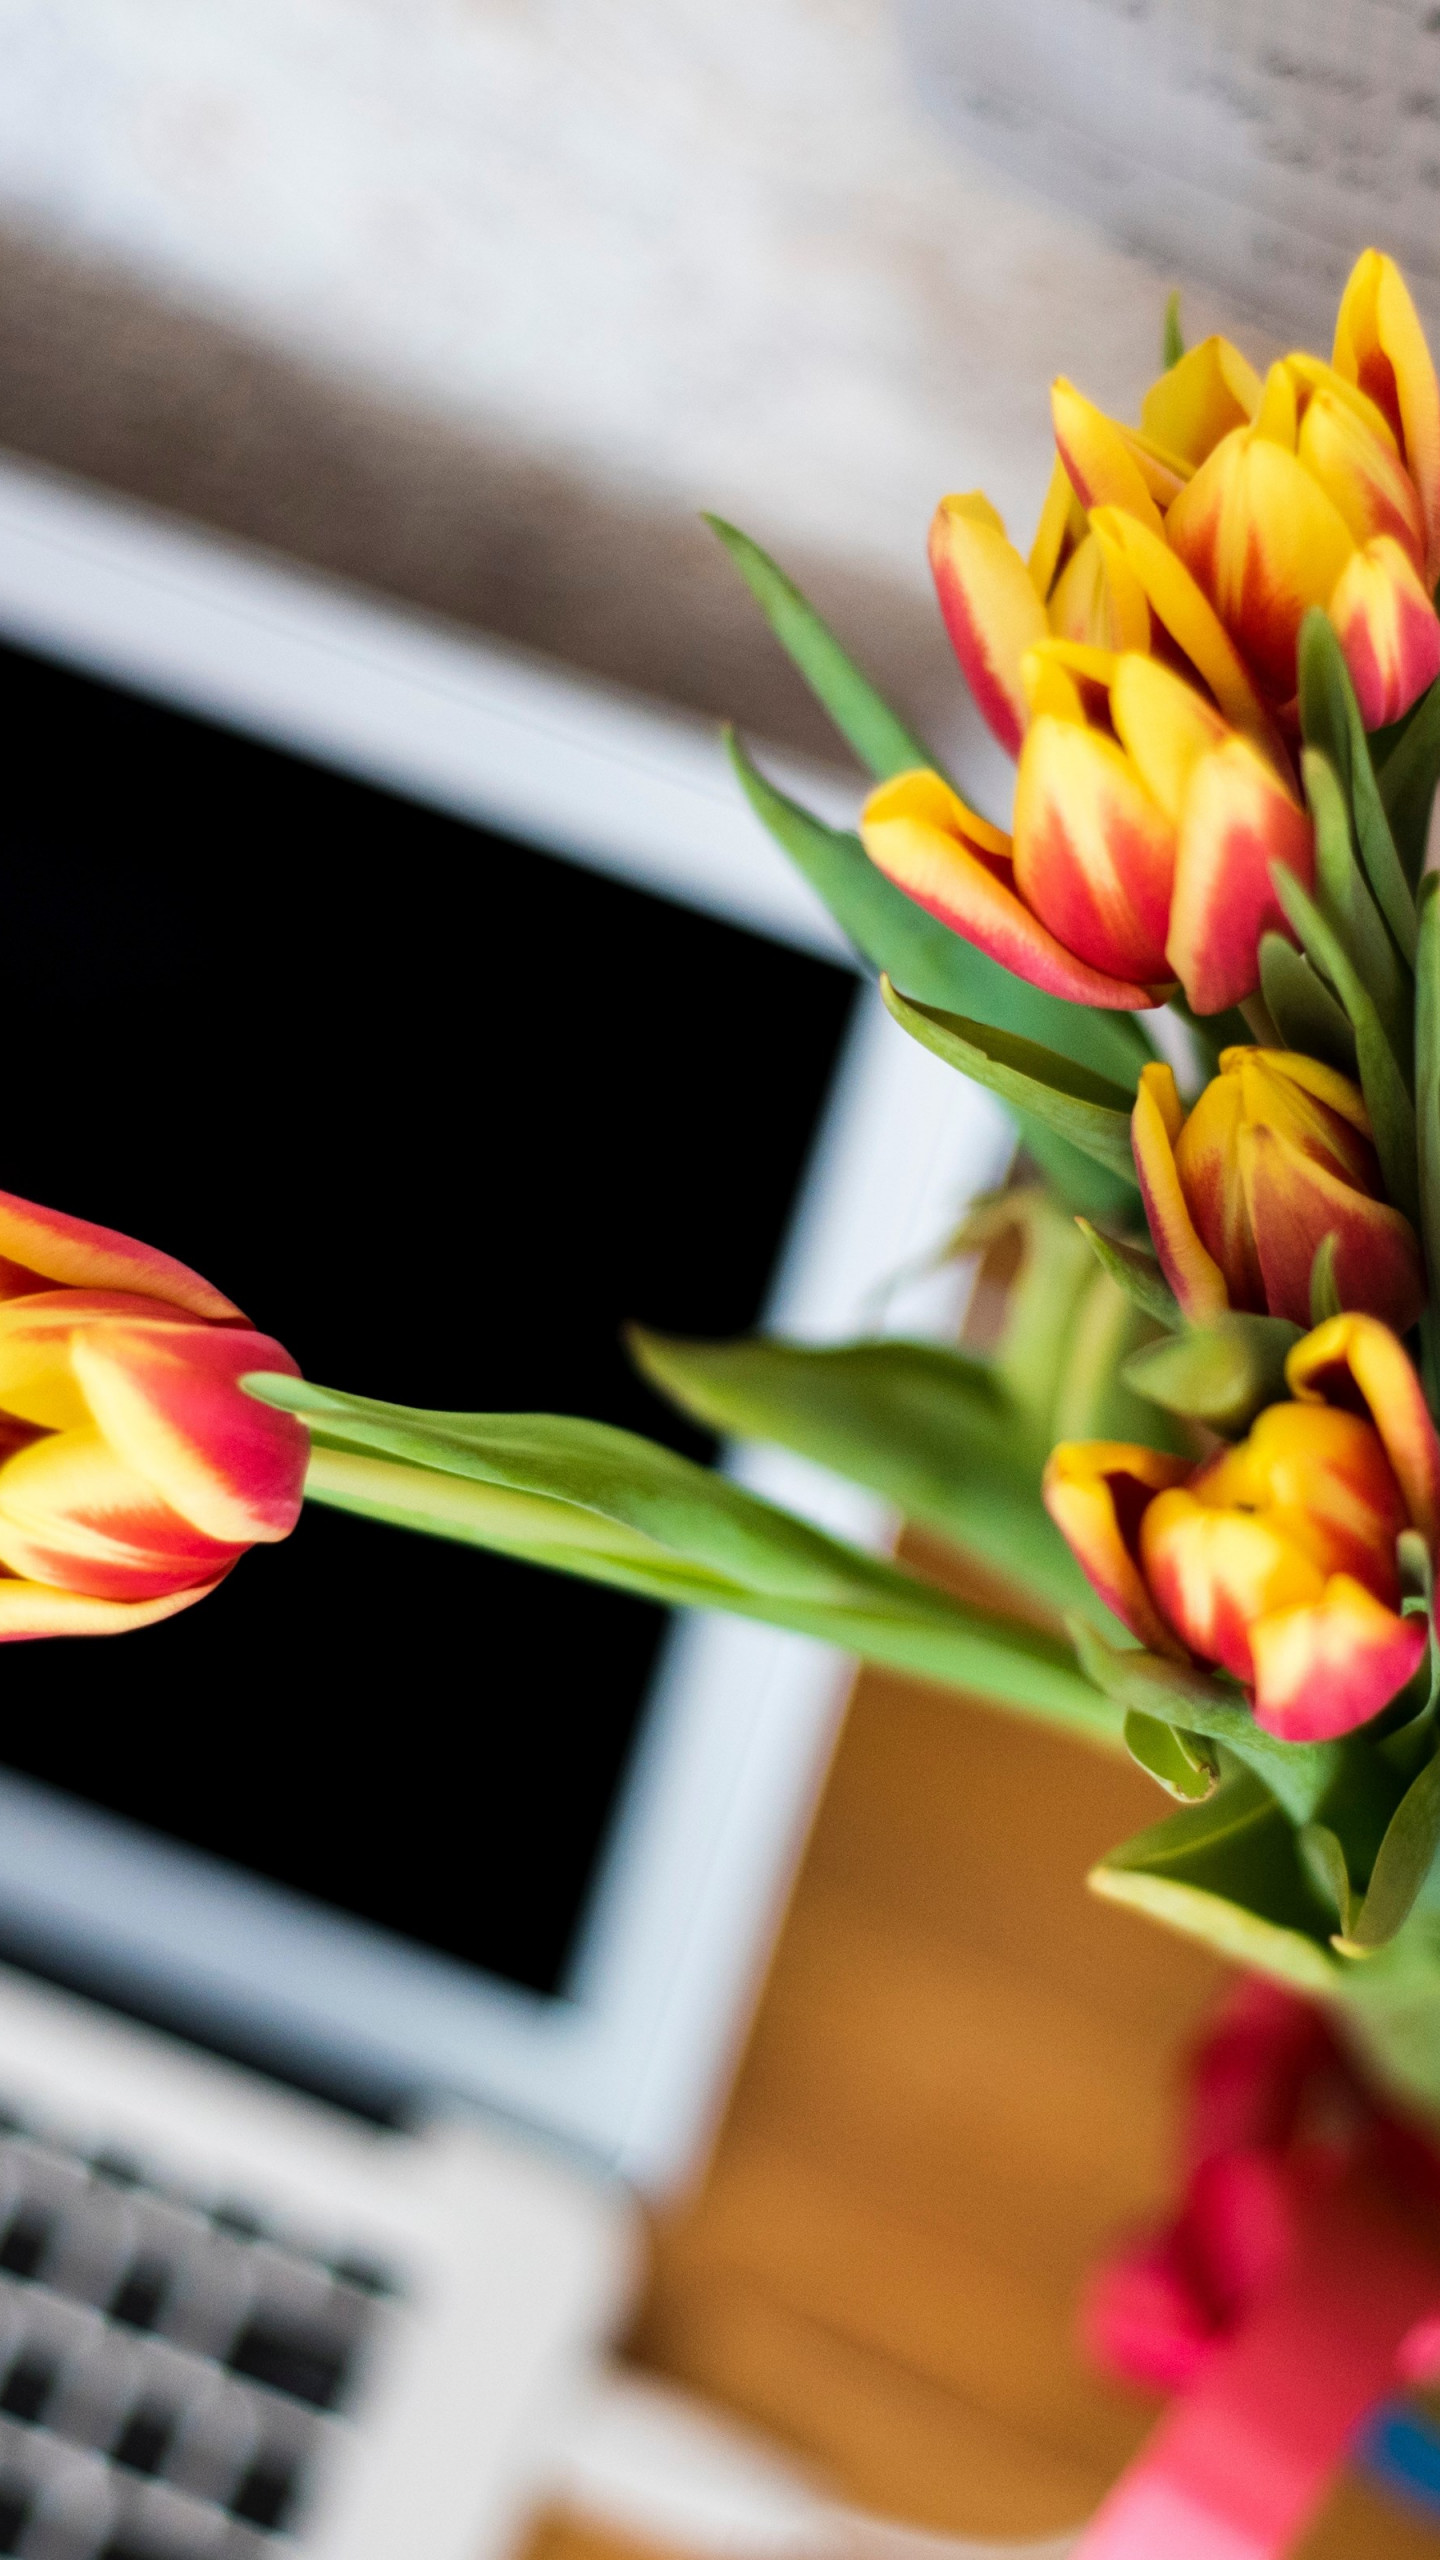 Laptop and tulips bouquet wallpaper 1440x2560